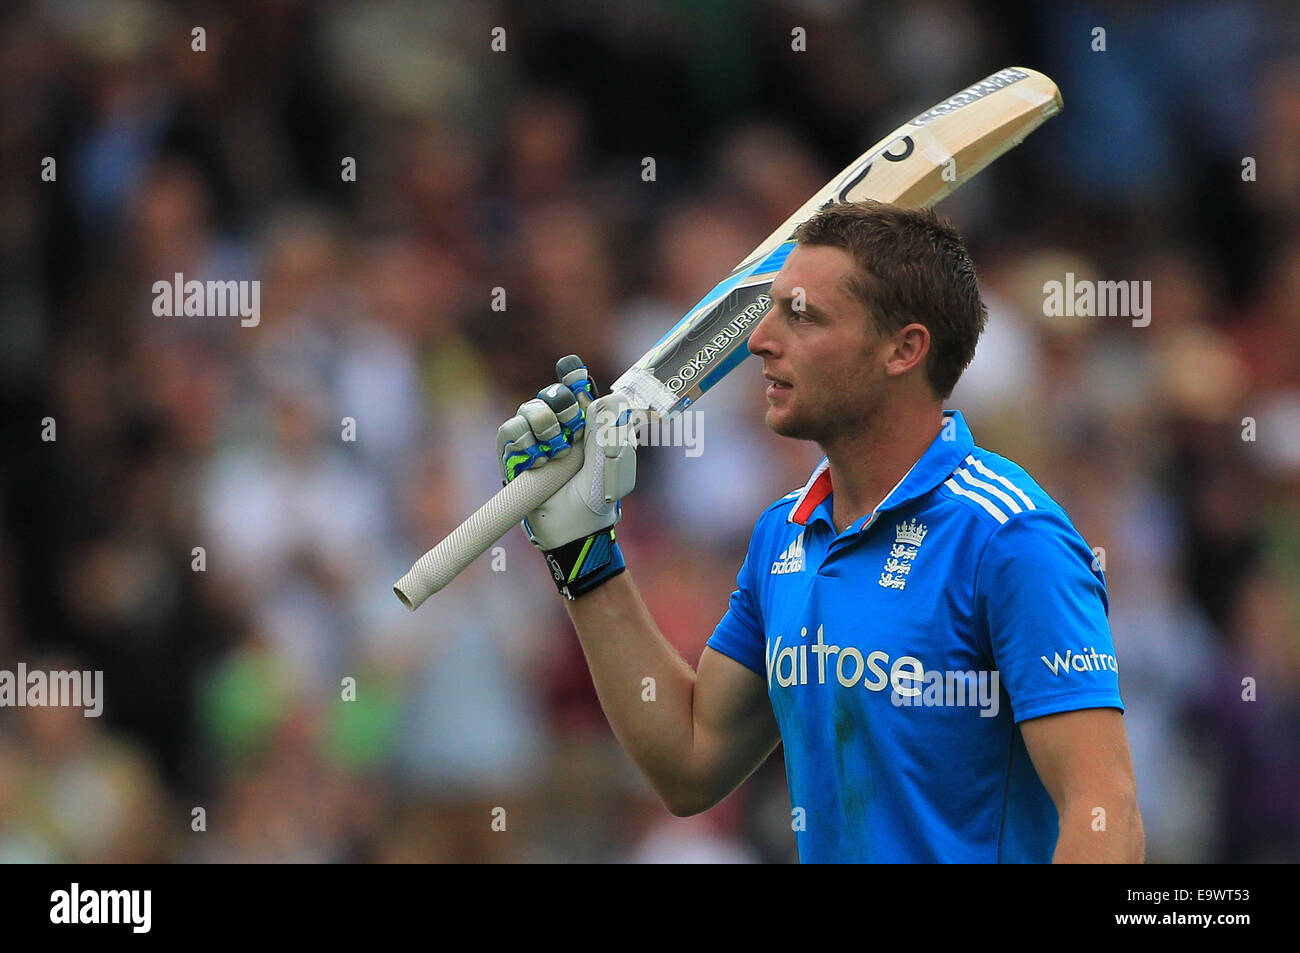 Cricket - Jos Buttler of England raises his bat as he leaves the field after scoring a Lord's century in an ODI vs Sri Lanka Stock Photo